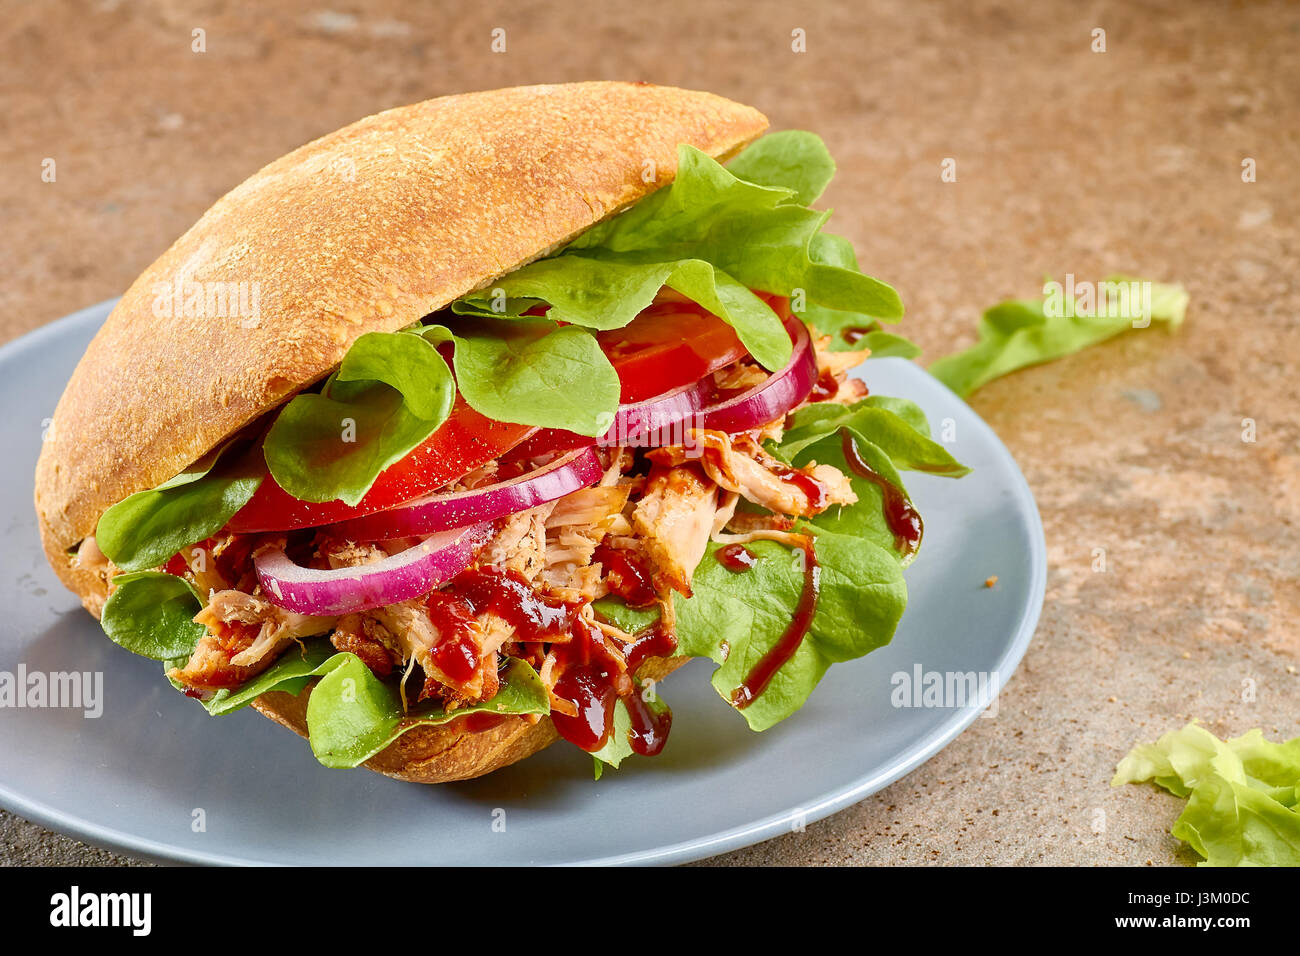 Sandwich with pulled pork, tomato and salad on blue dish Stock Photo